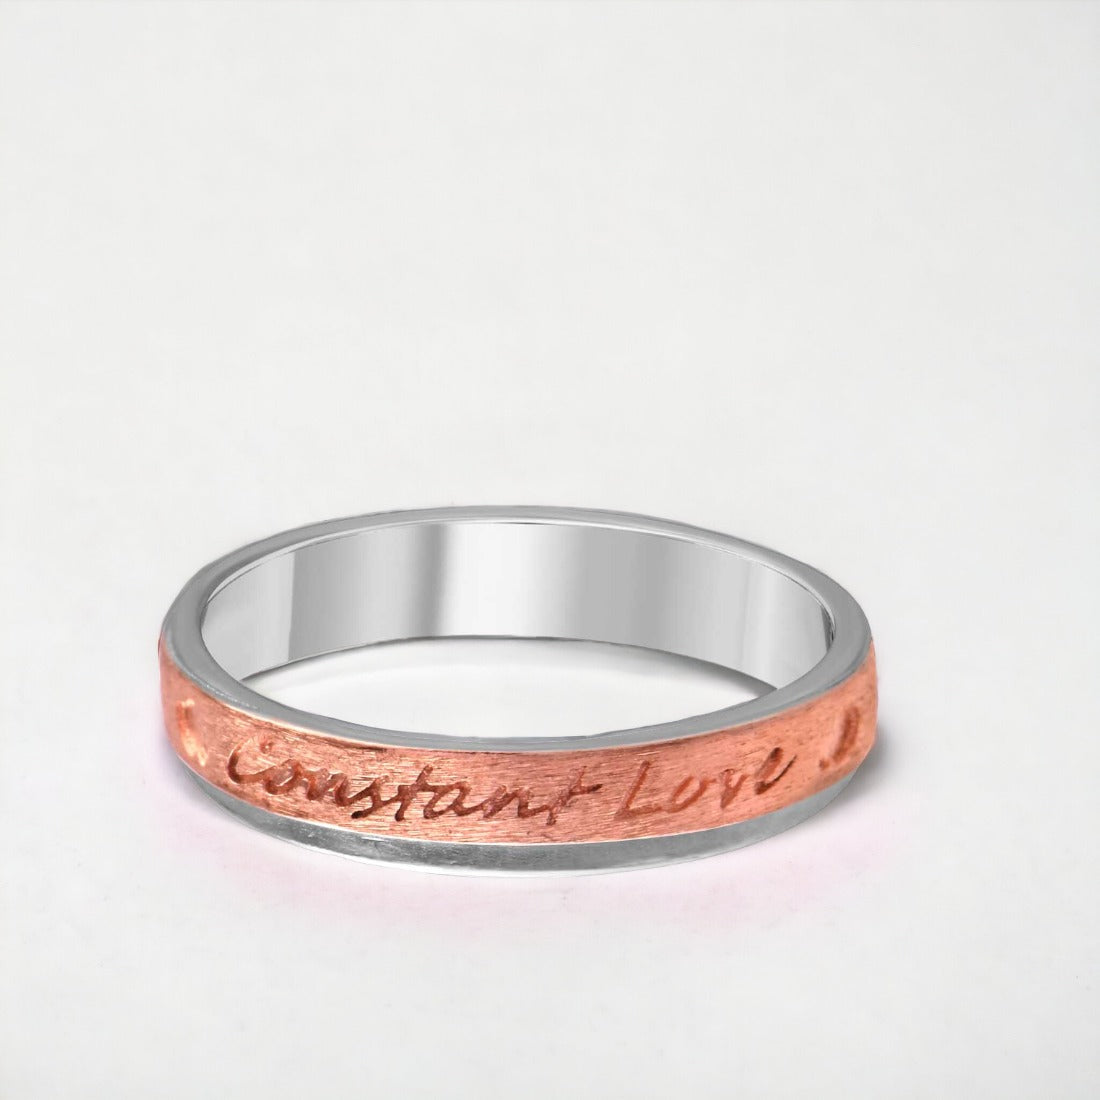 Instant Love Couple Ring Set